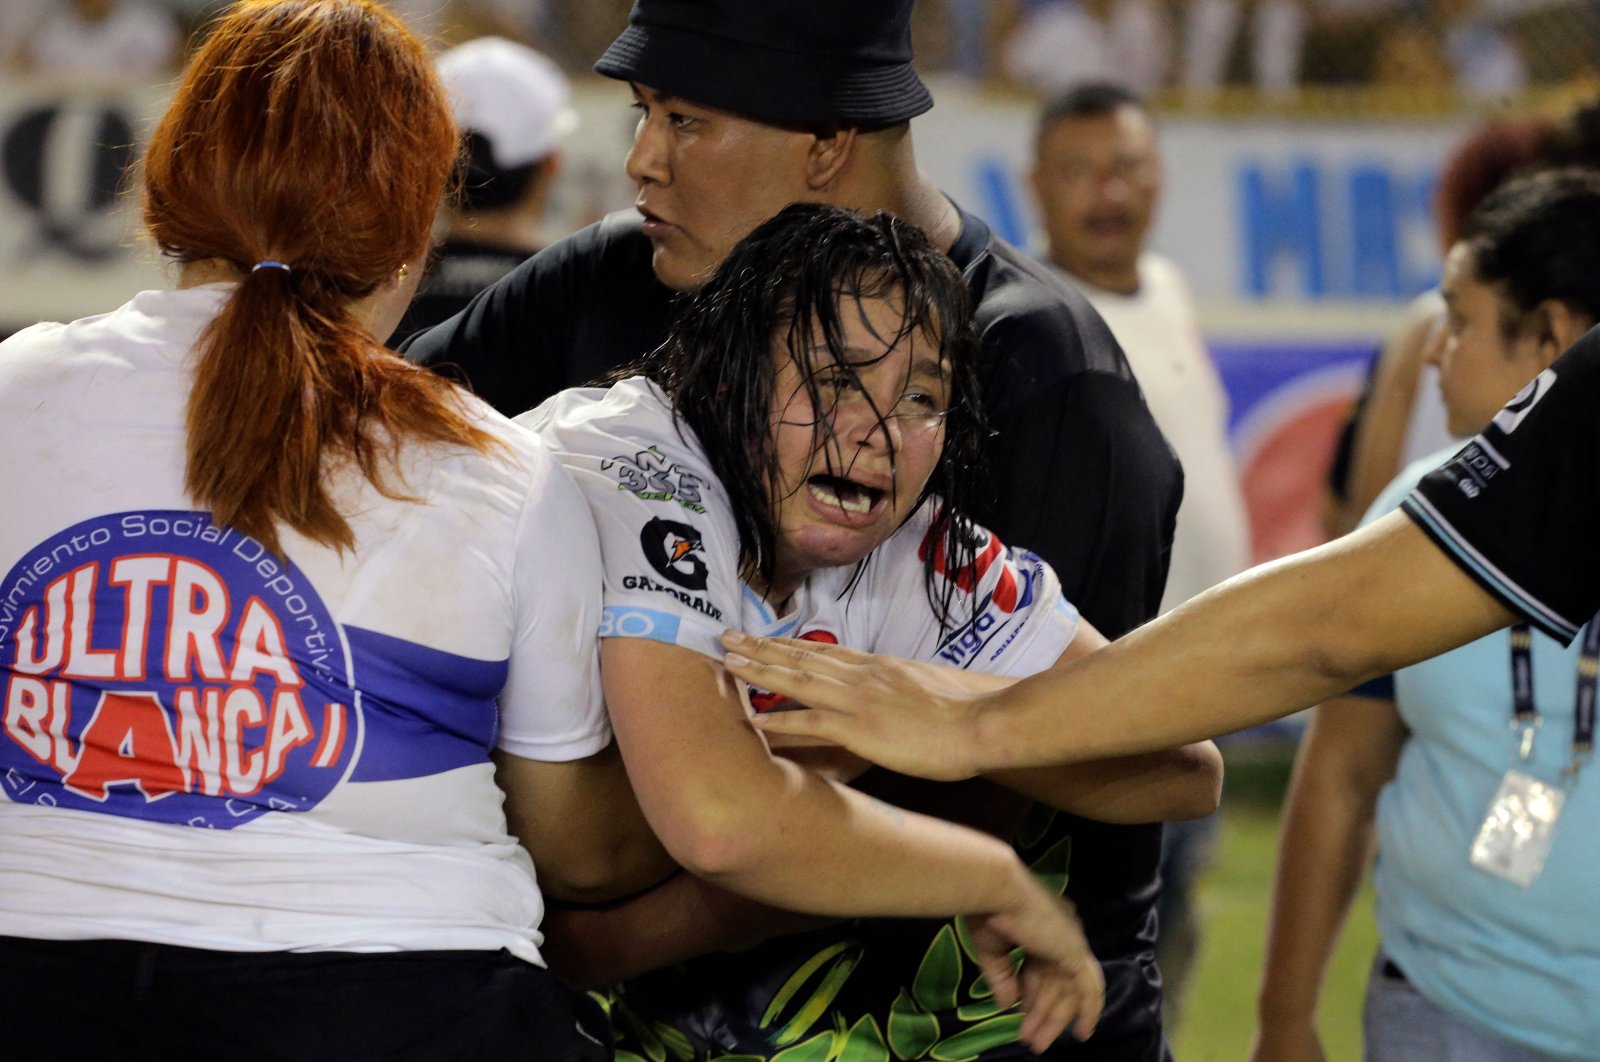 A woman is held by others as she cries following a stampede at a football match, San Salvador, El Salvador, May 20, 2023. (AFP Photo)